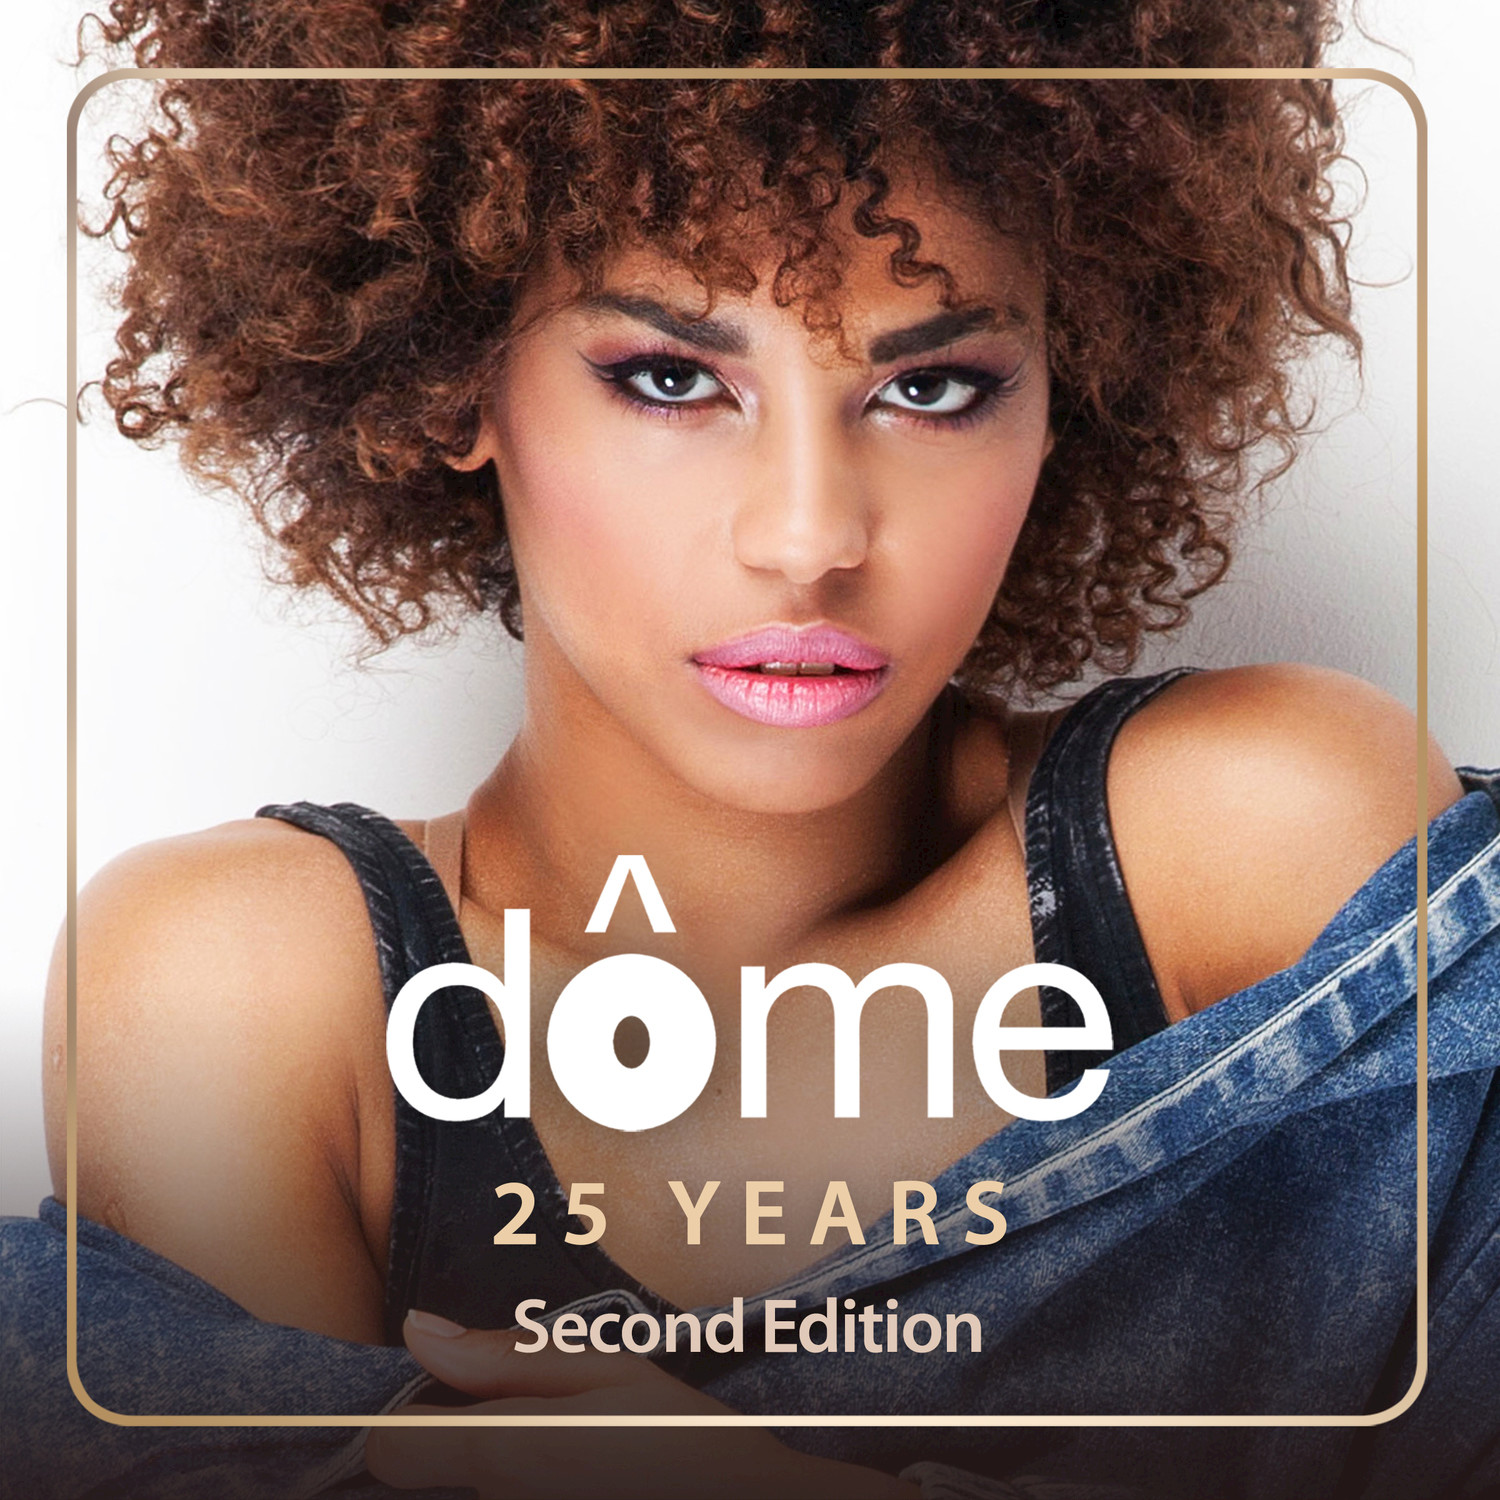 Dome 25 Years: Second Edition